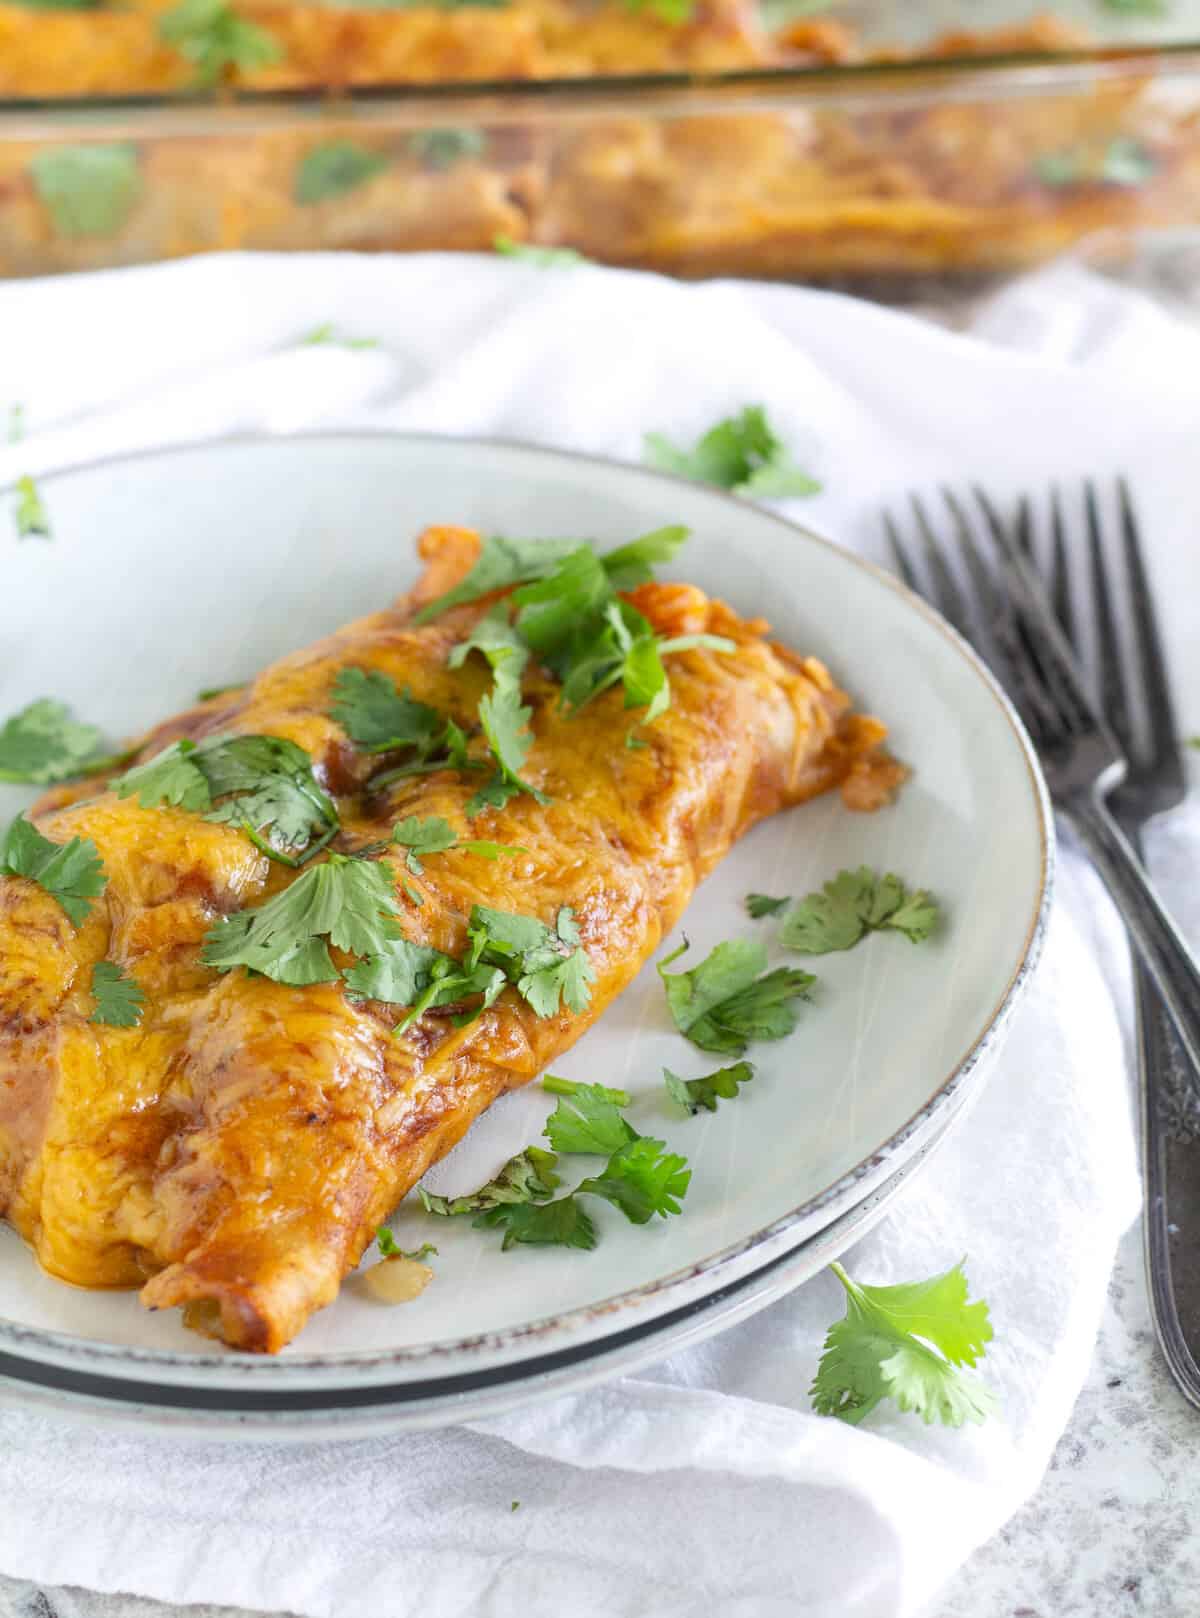 Two Keto Enchiladas on plate with cilantro sprinkled on top